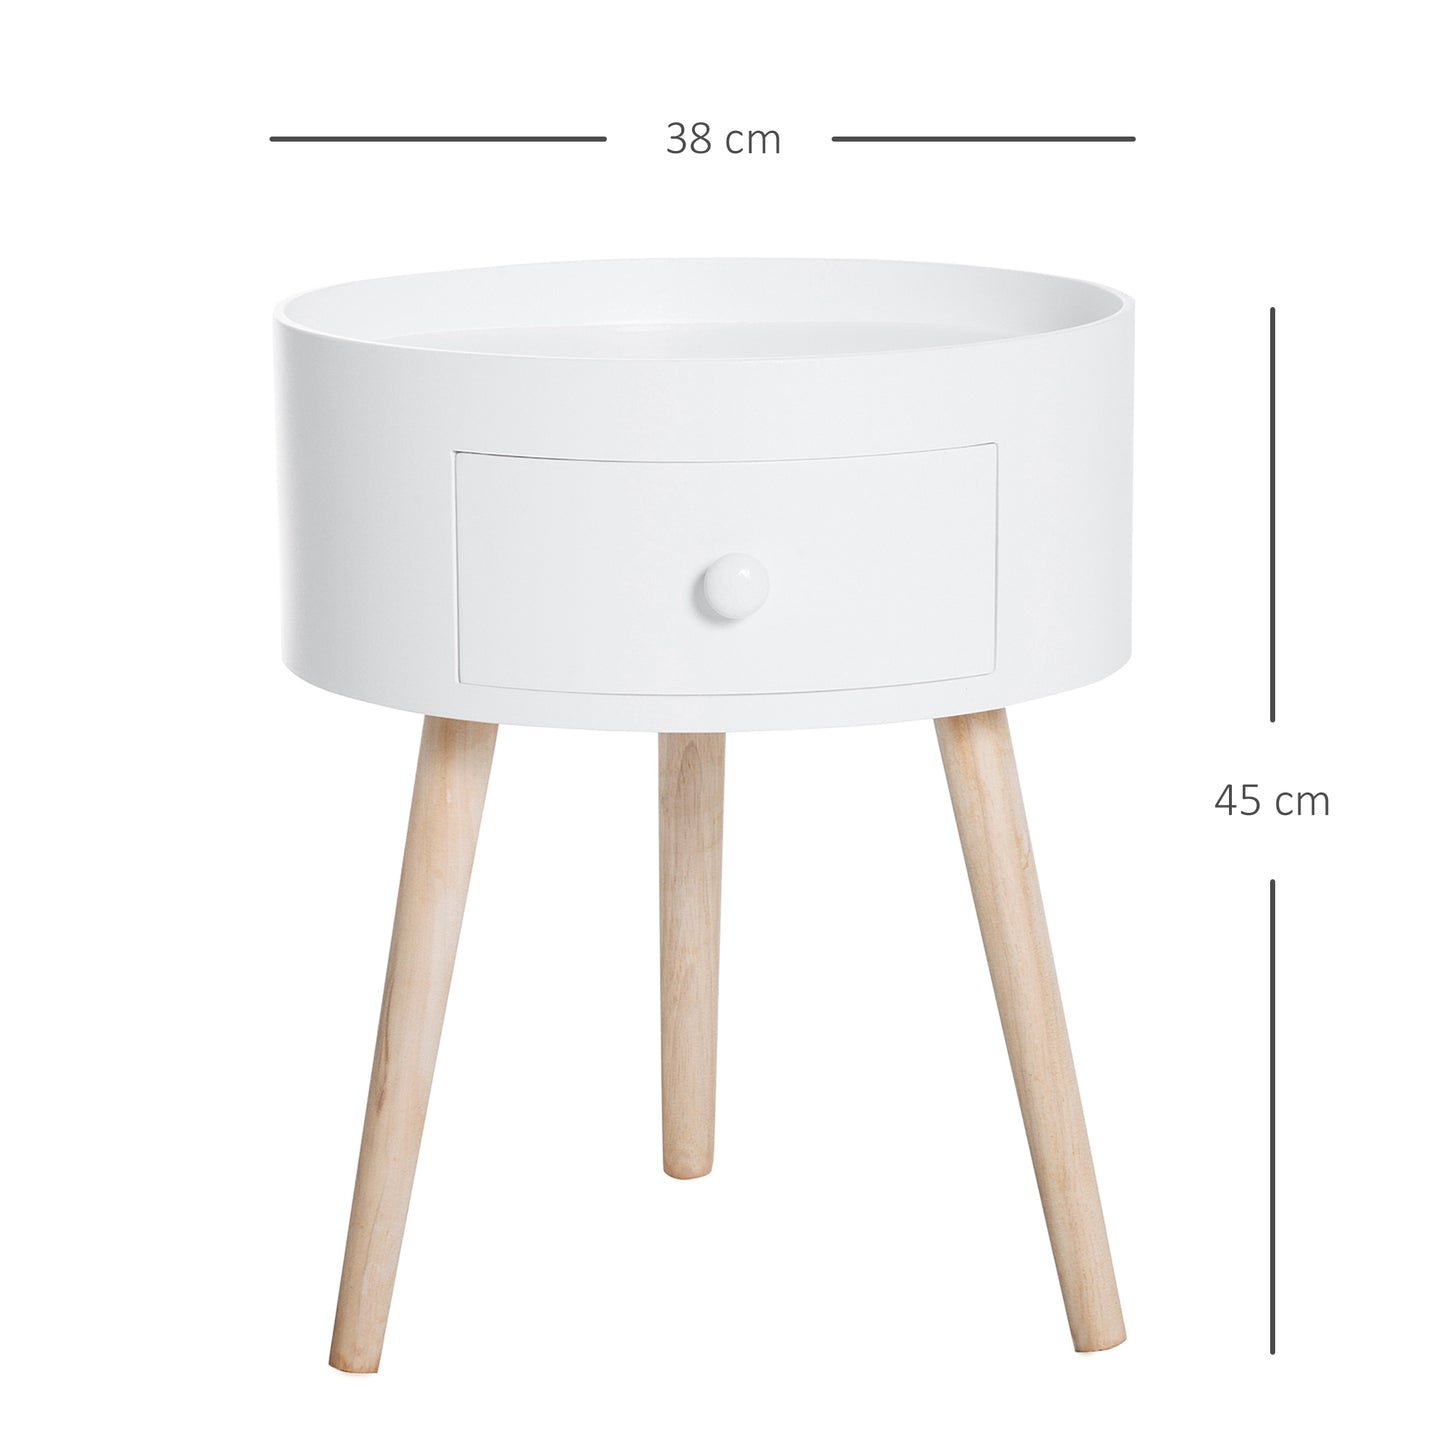 Modern Coffee Table, Wooden Side Table with Drawer, Wood Legs, Round Table, Living Room Storage, White, HOMCOM, 3